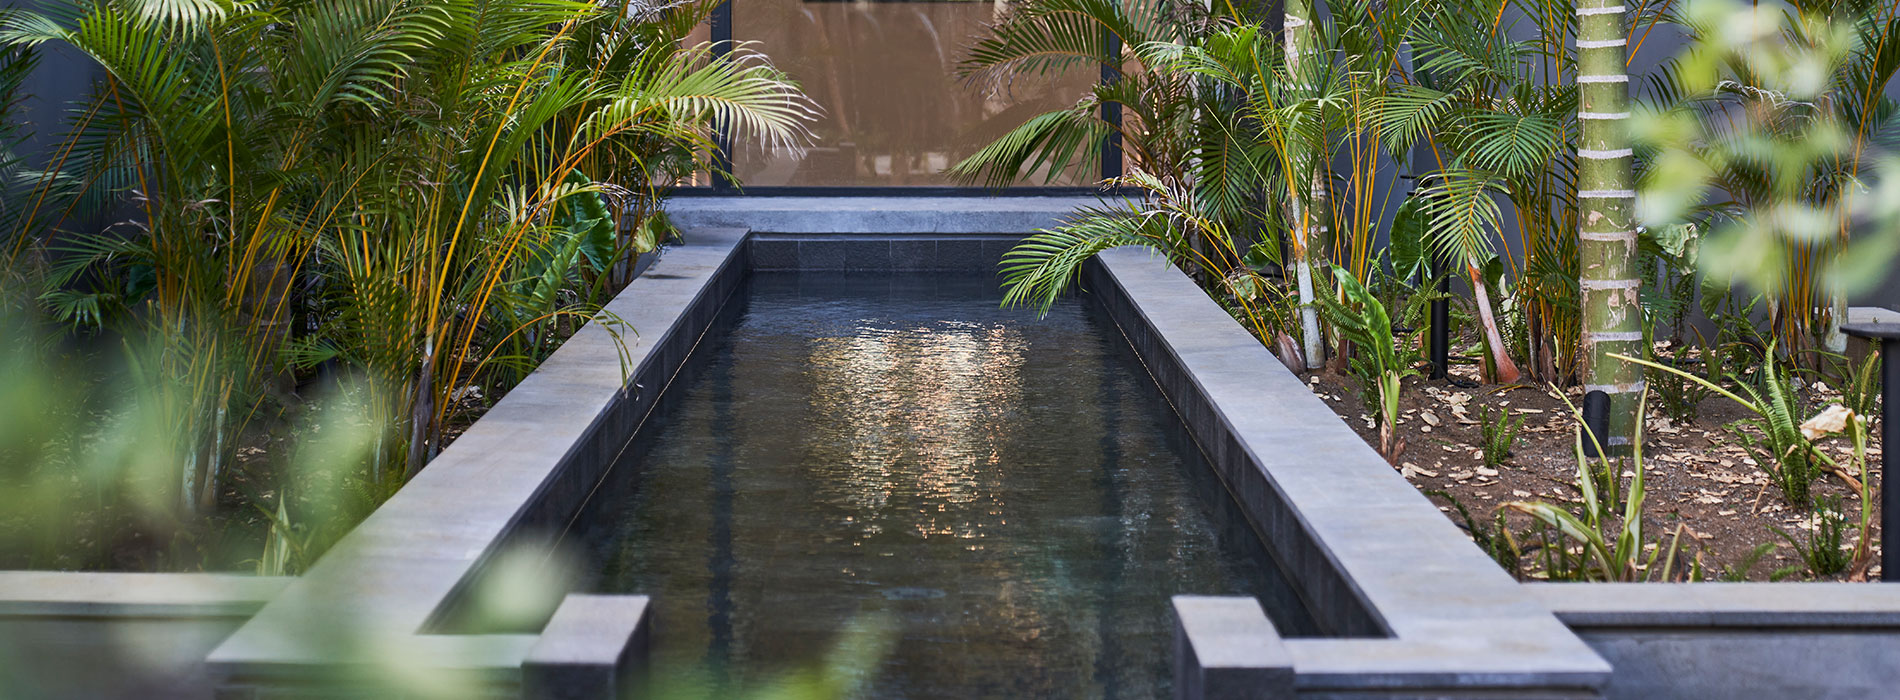 Wellness in Mauritius: A look inside the newly opened Lux Grand Baie